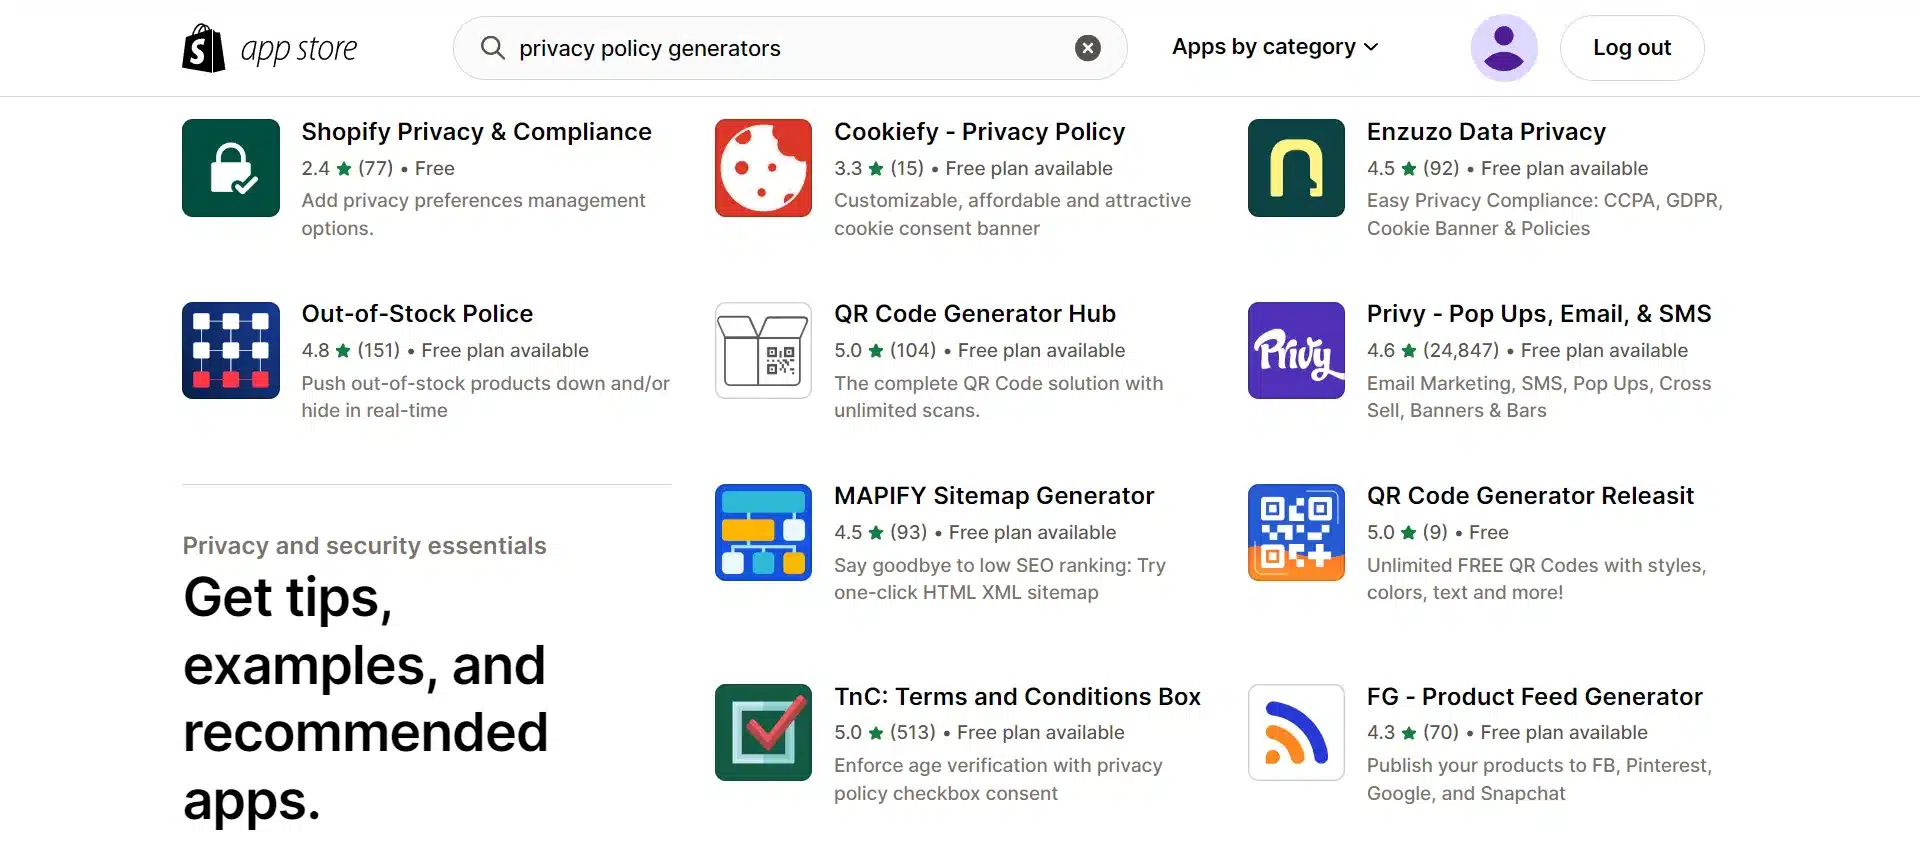 Shopify privacy policy generator on App store